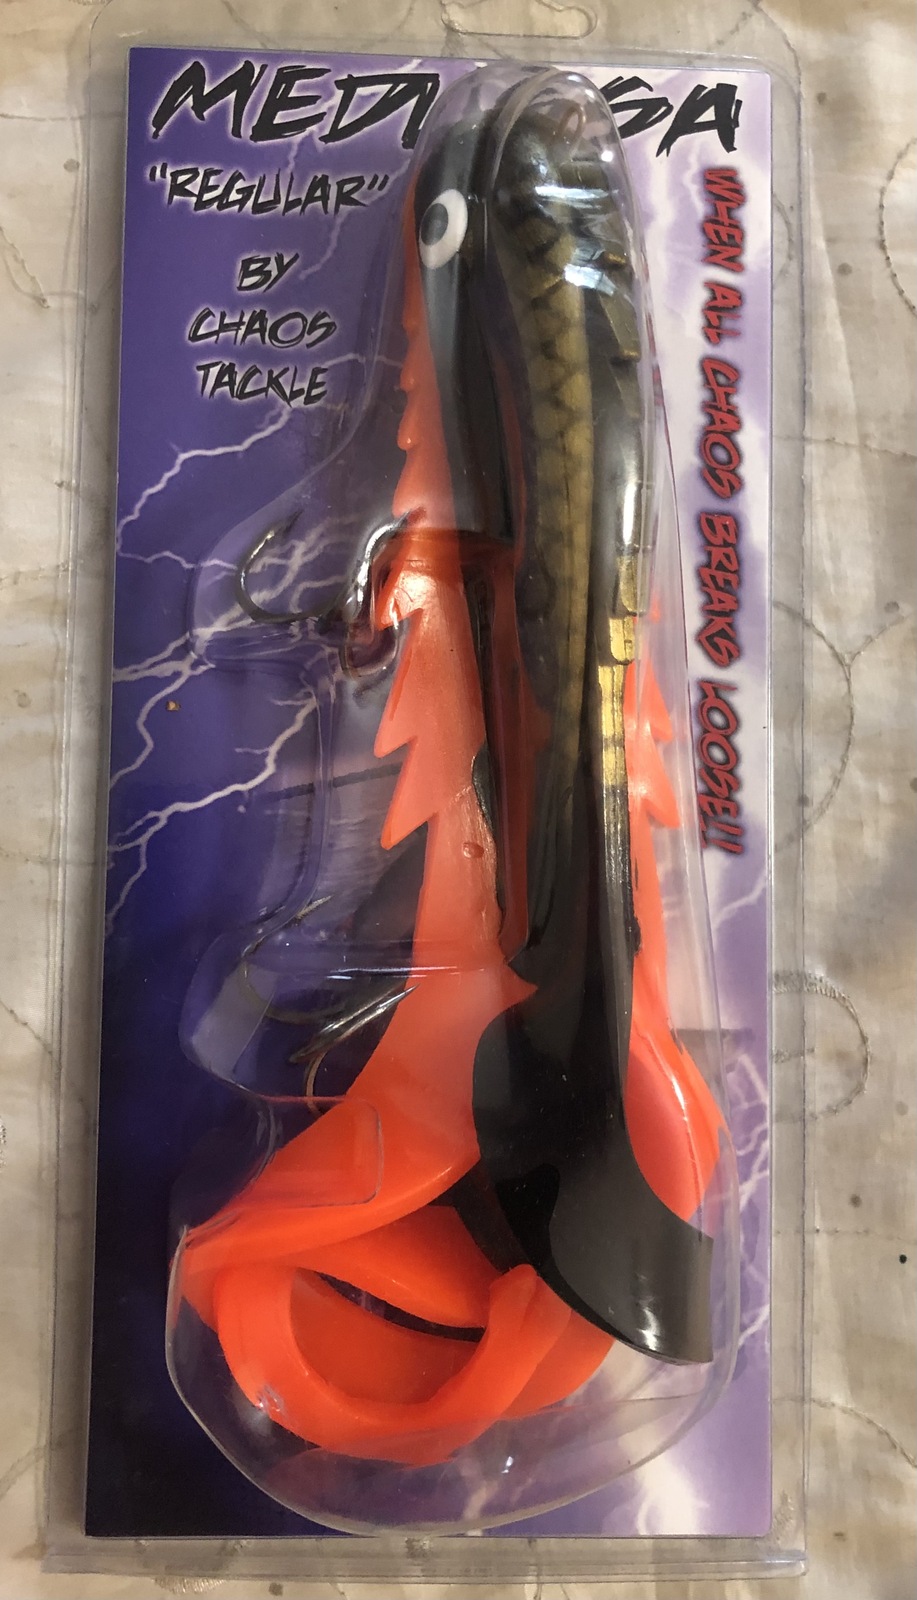 Chaos Tackle Medusa Regular Standard Weight Lure For Muskie Fishing Black Perch